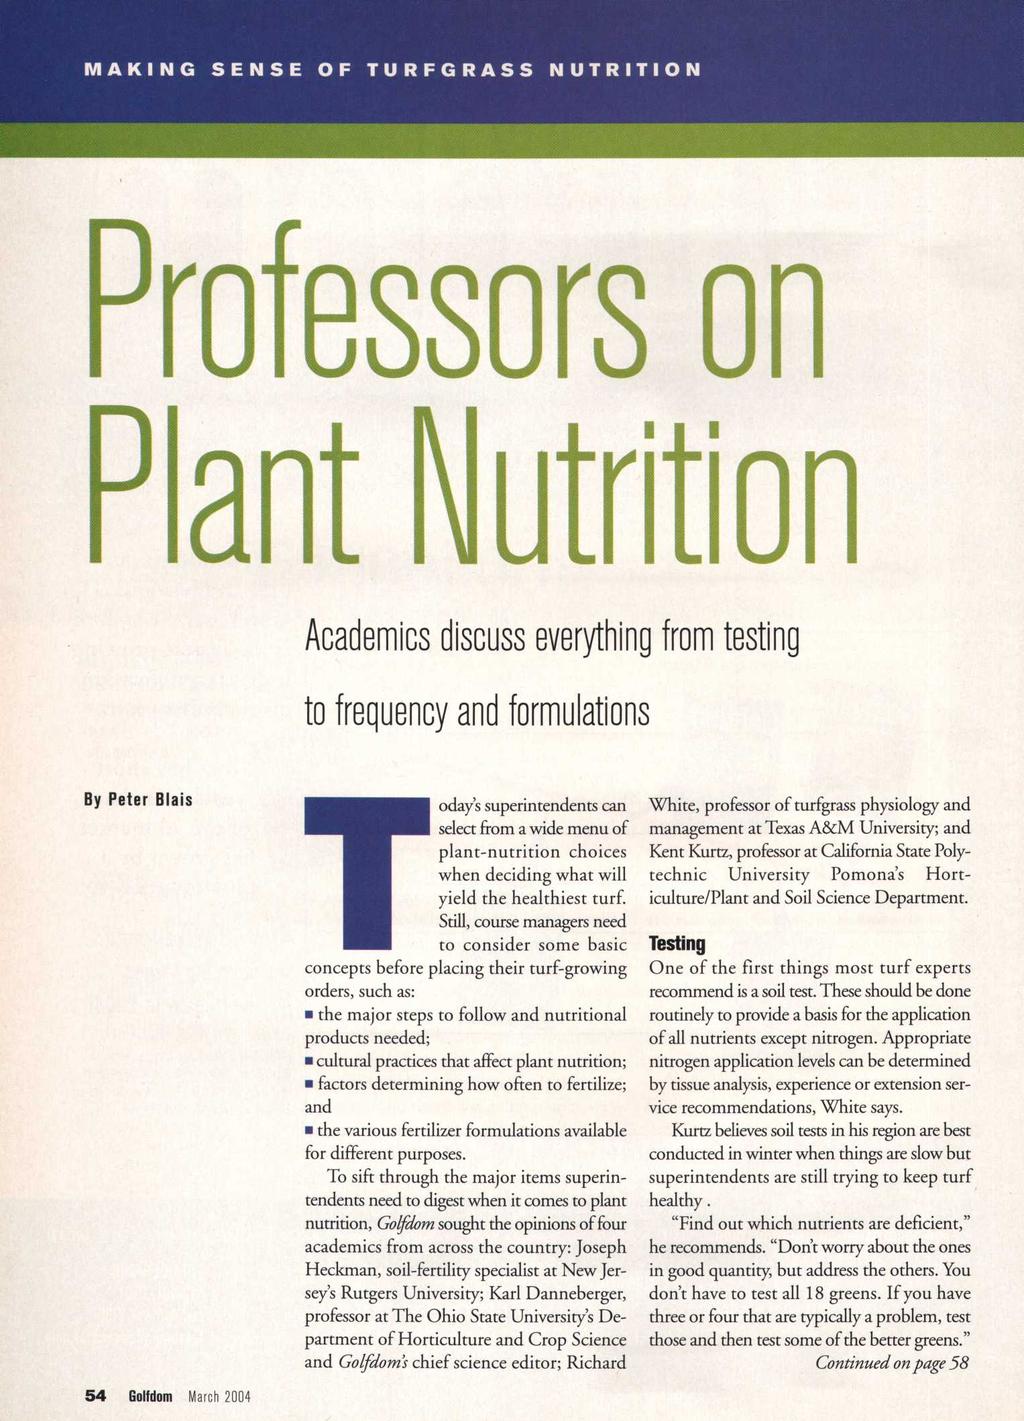 MAKING SENSE OF TURFGRASS NUTRITION Professors on Plant Nutrition Academics discuss everything from testing to frequency and formulations By Peter Biais oday's superintendents can select from a wide